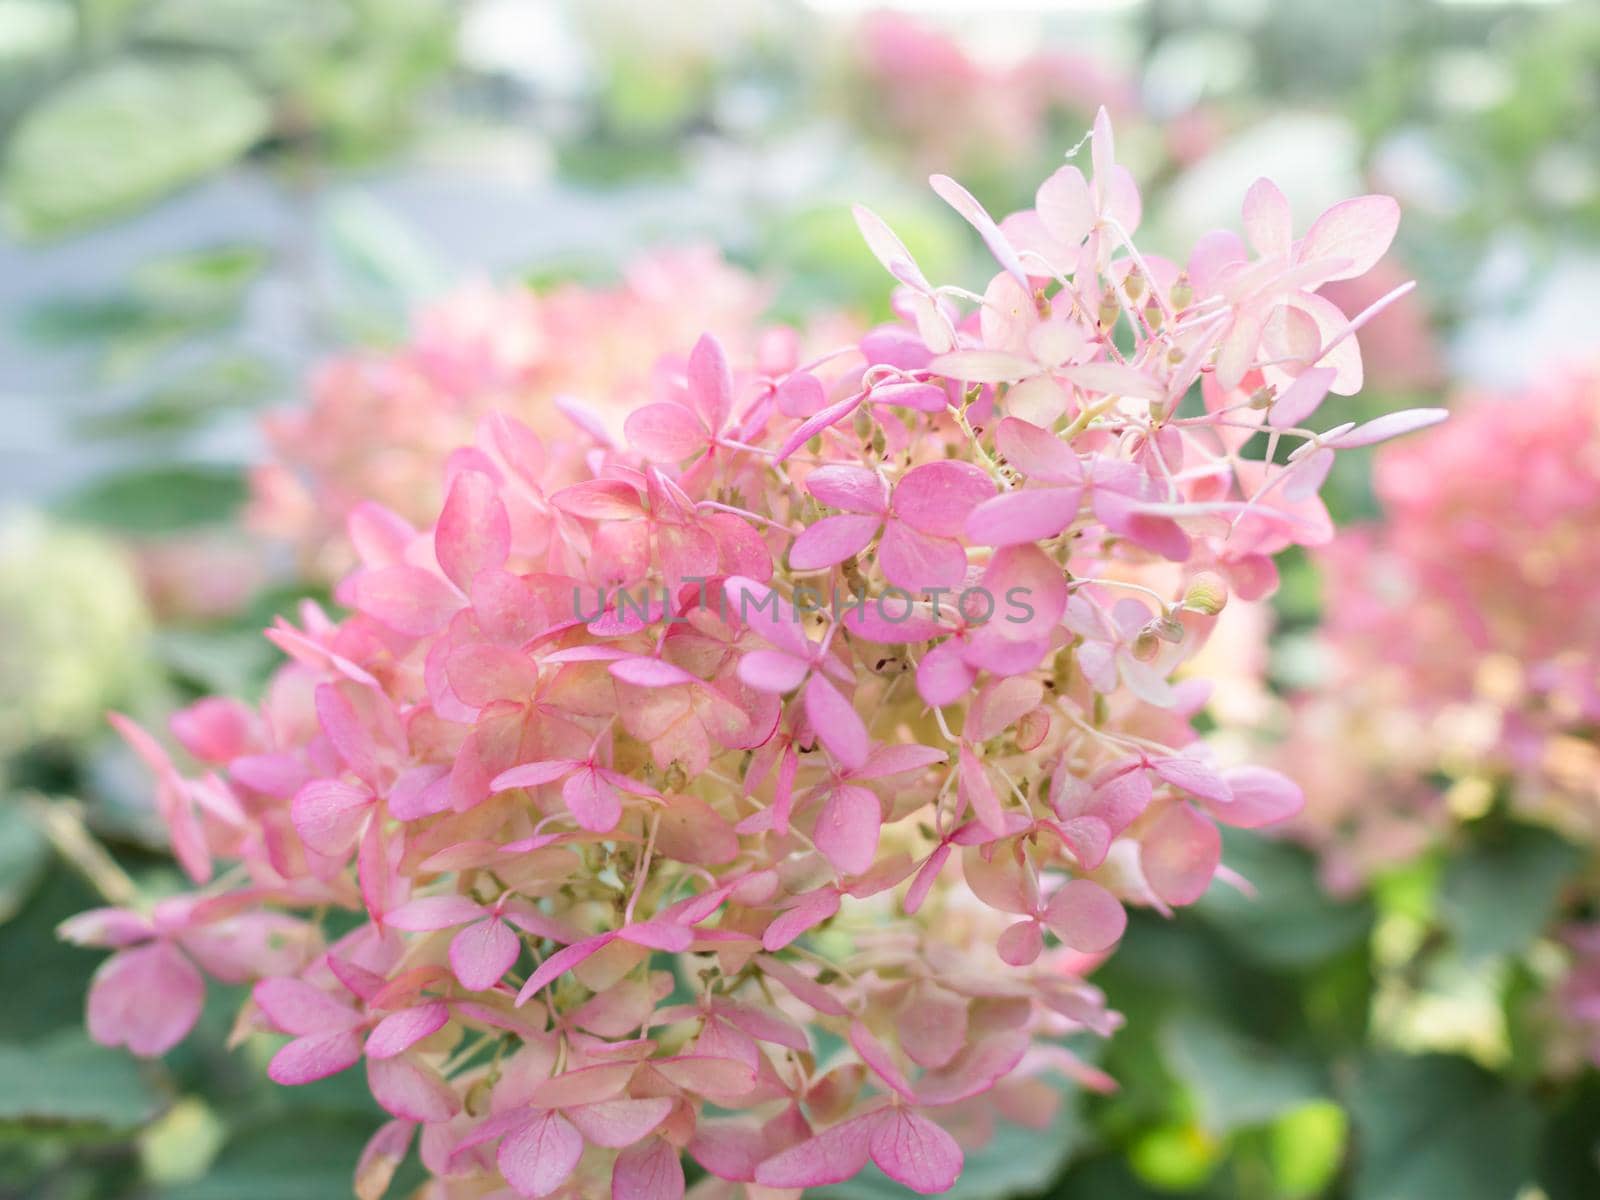 Natural background with pink hydrangea. Bush with flowers in bloom. Summer sunlight.